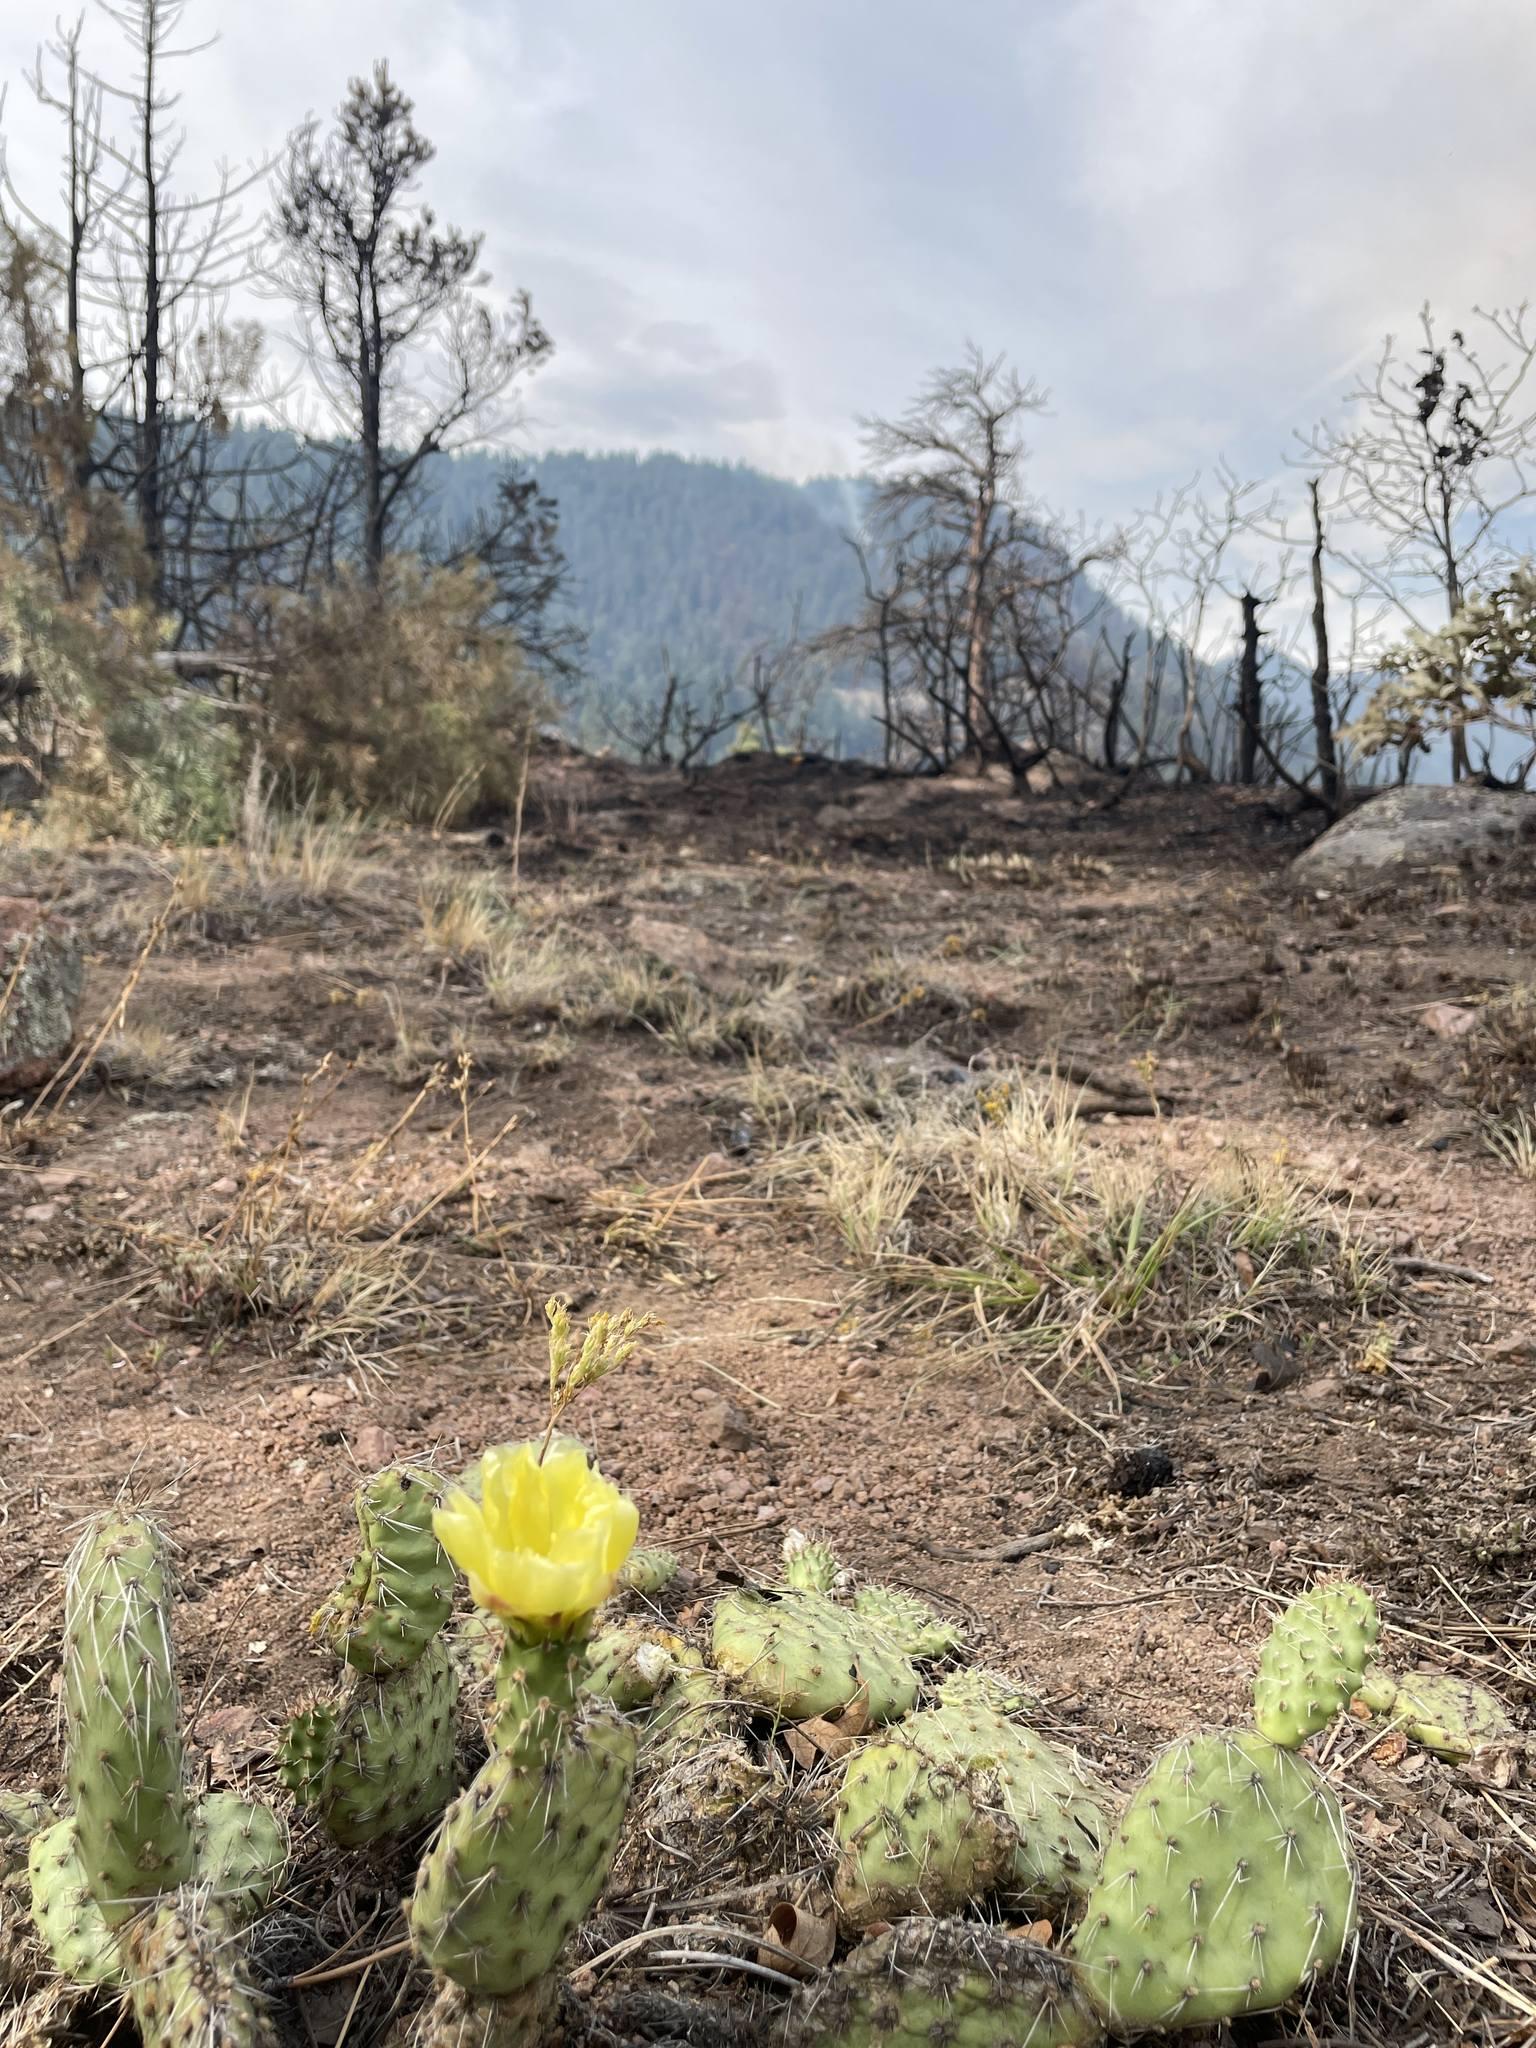 A cactus with yellow flower is in the font of the photo. Vegetation beyond the cactus is very sparse. Towards the back of the photo, whisps of smoke from the fire rise up against a mountain in the background. 